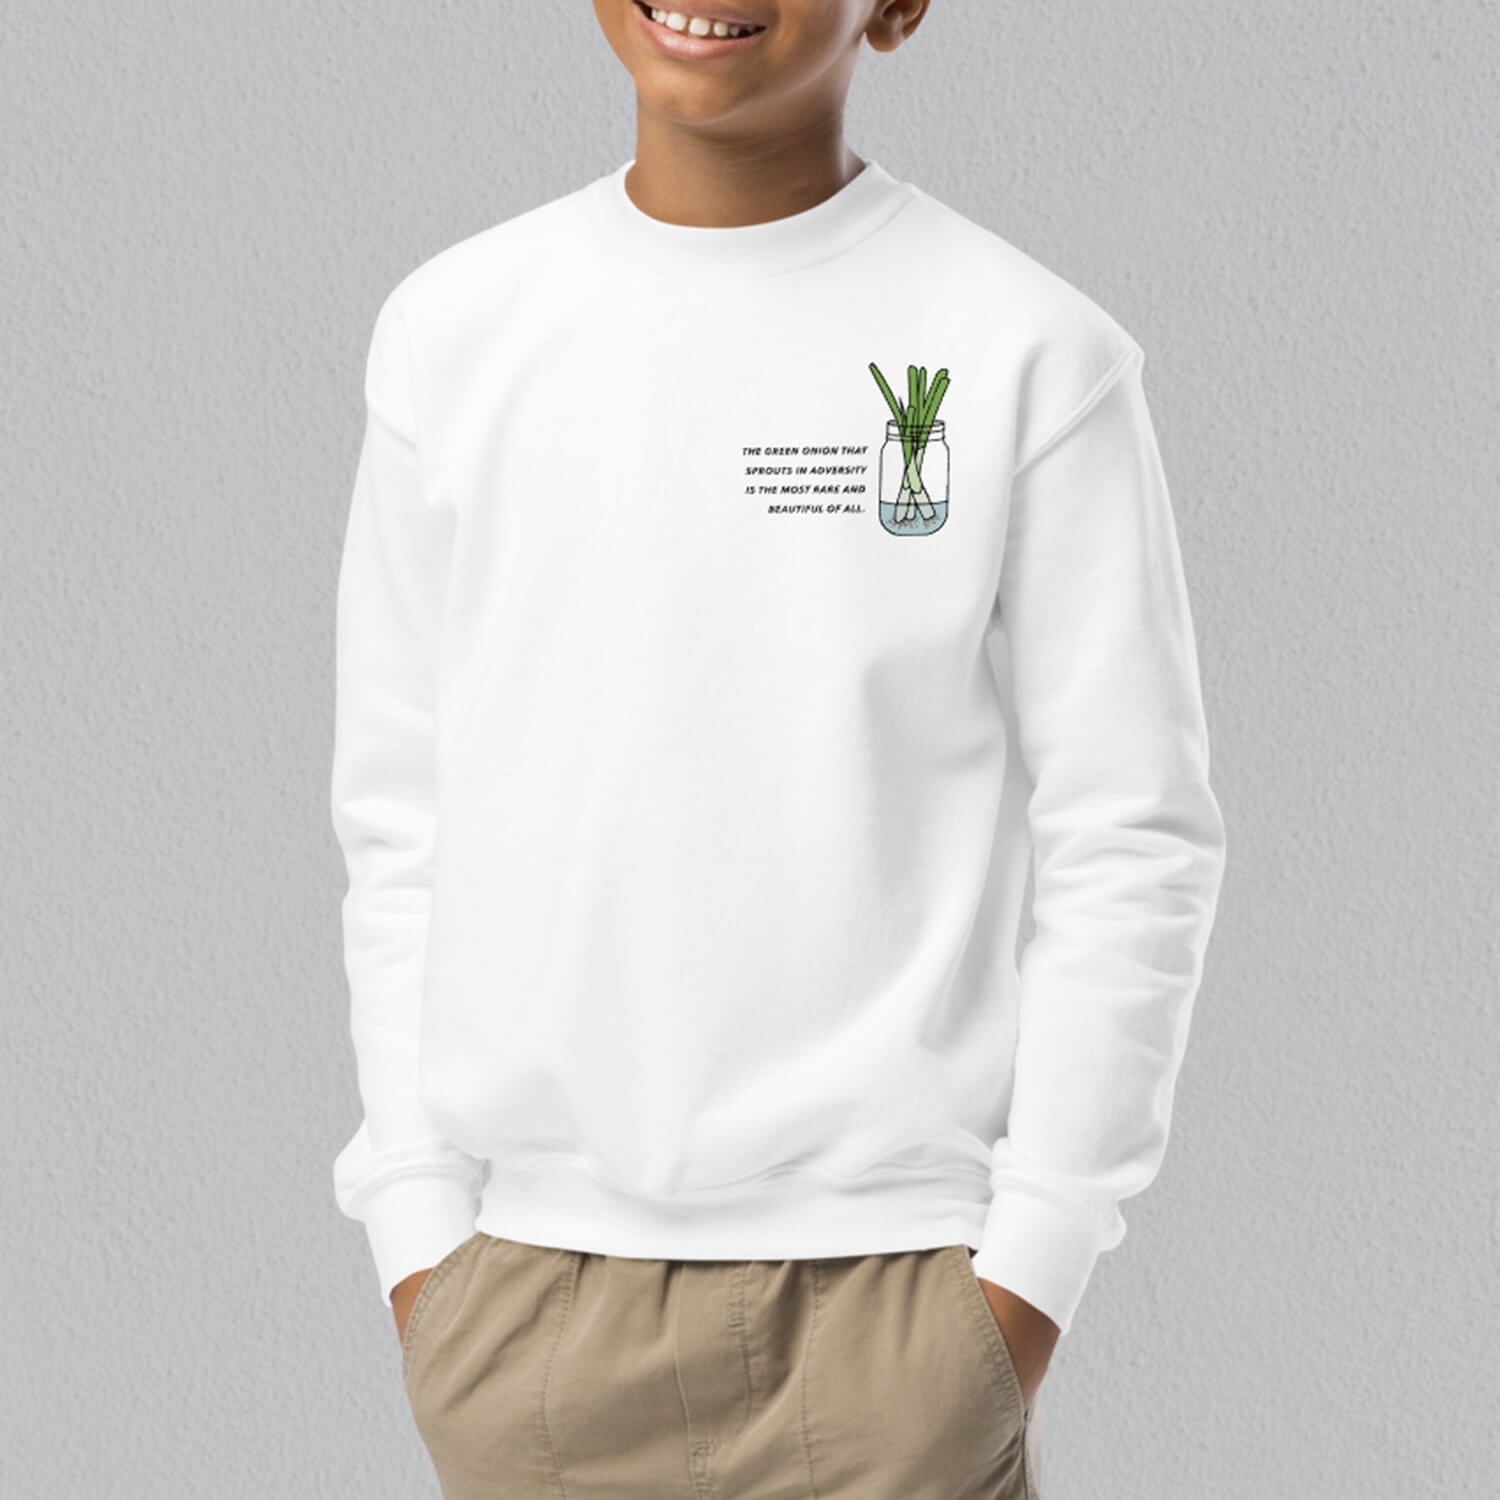 "The Green Onion That Sprouts" Kids Sweatshirt - Ni De Mama Chinese Clothing